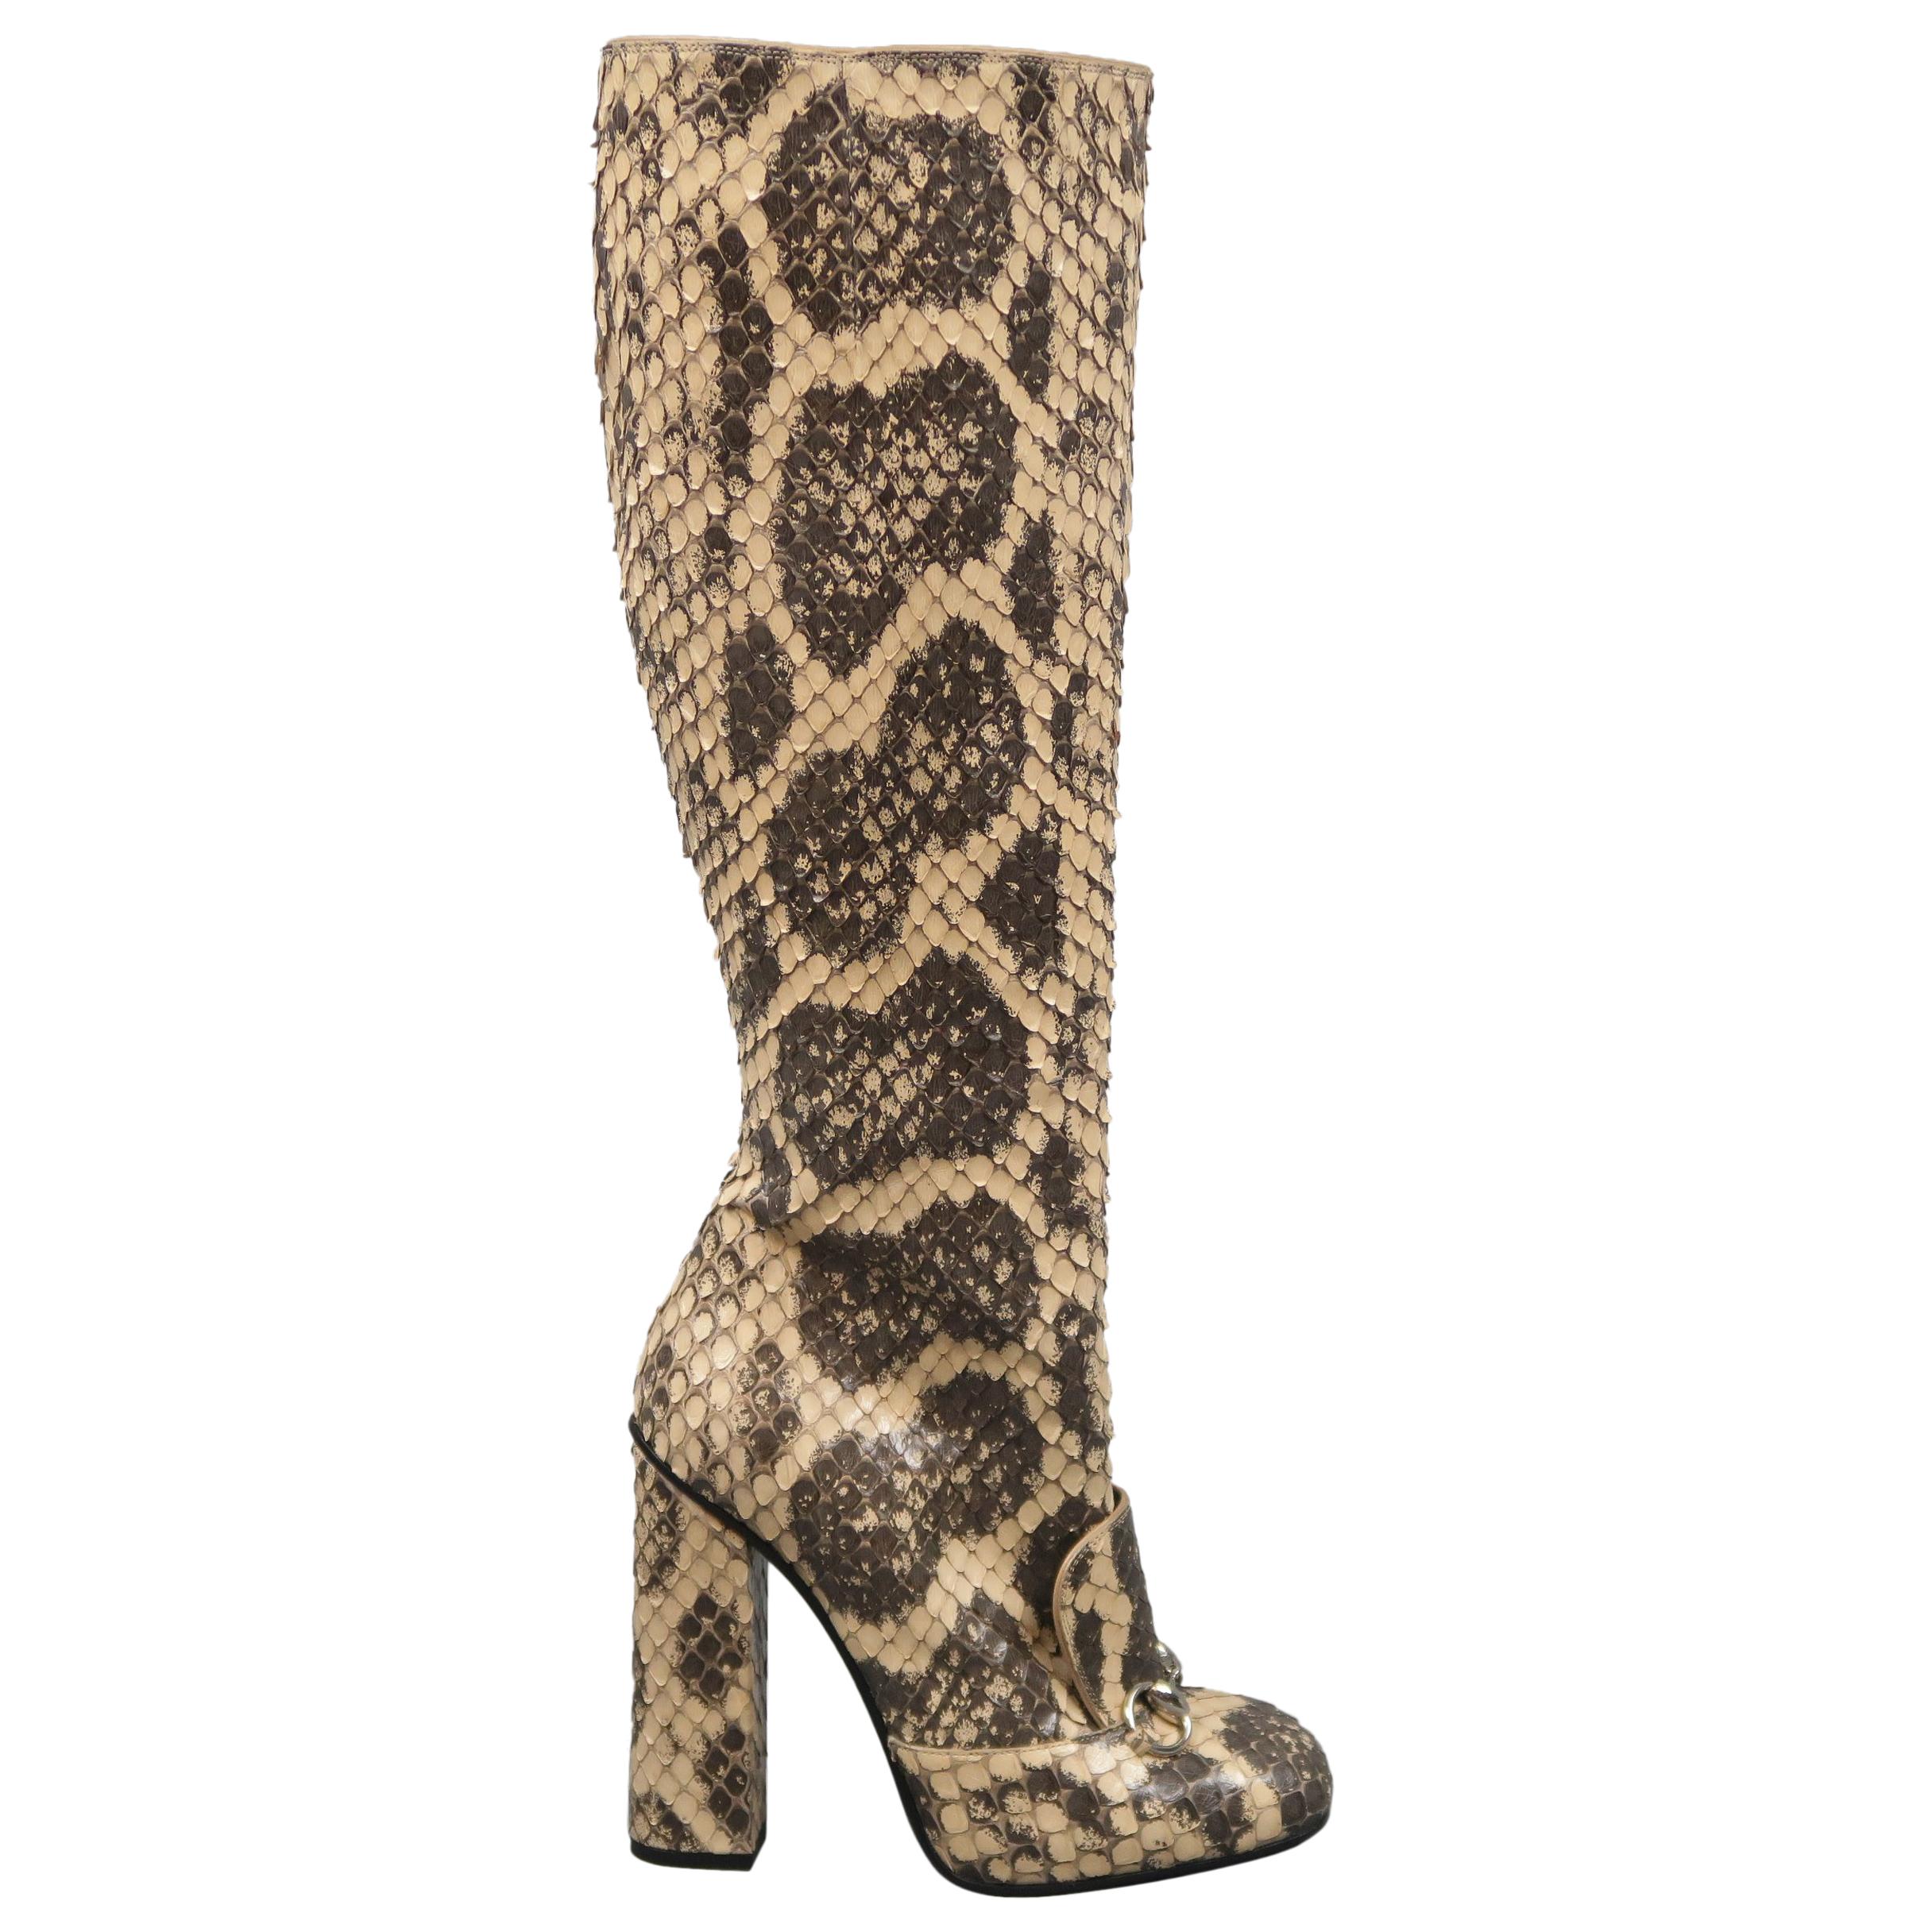 GUCCI Size 7.5 Beige Phython Snakeskin Leather Horsebit Knee High Boots